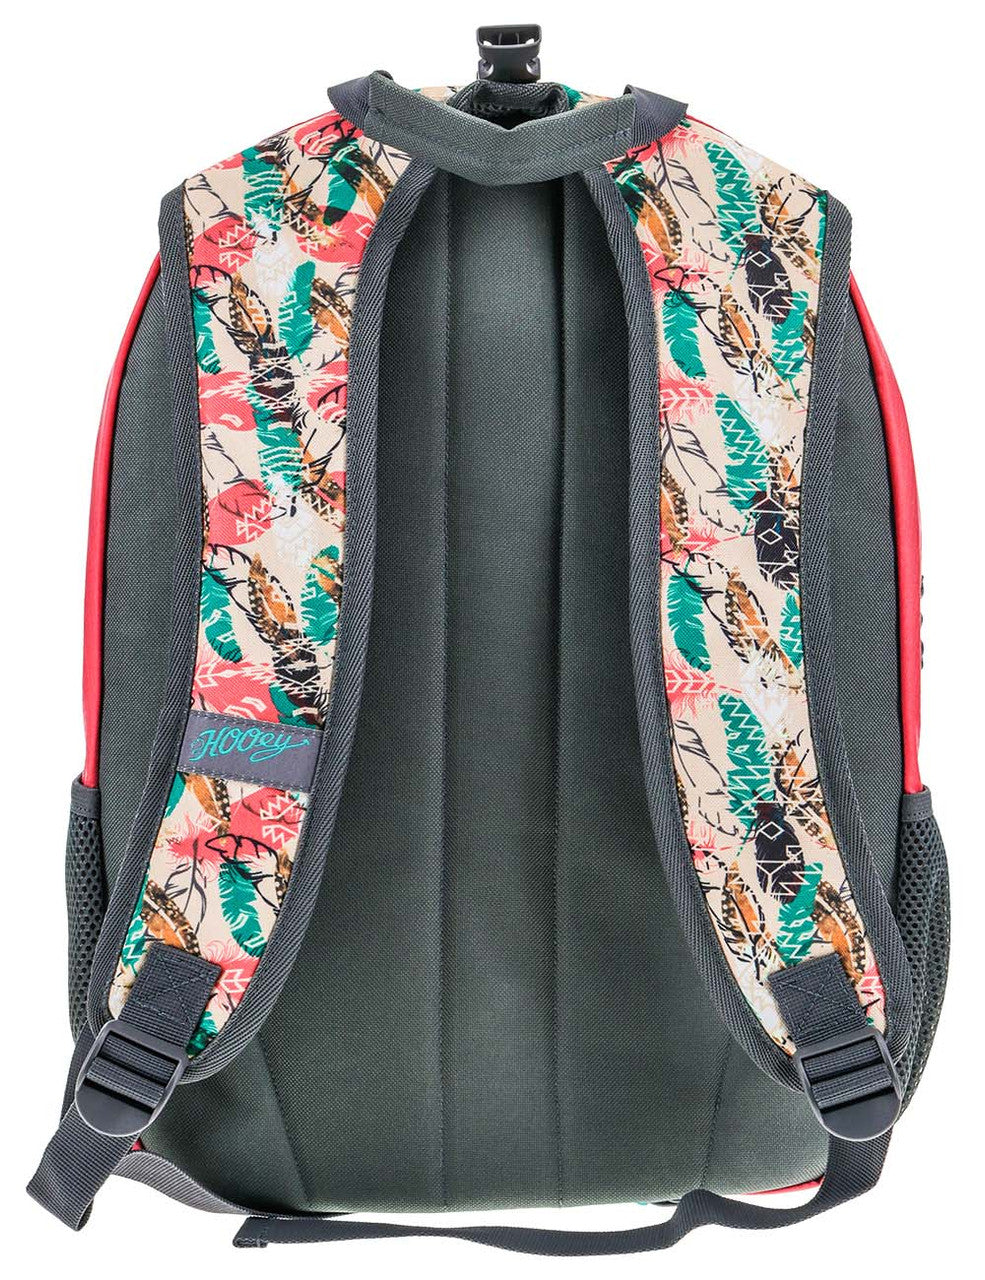 "Rockstar" Cream/Rose/Turquoise Feather Aztec Pattern with Rose/Black Accents Backpack